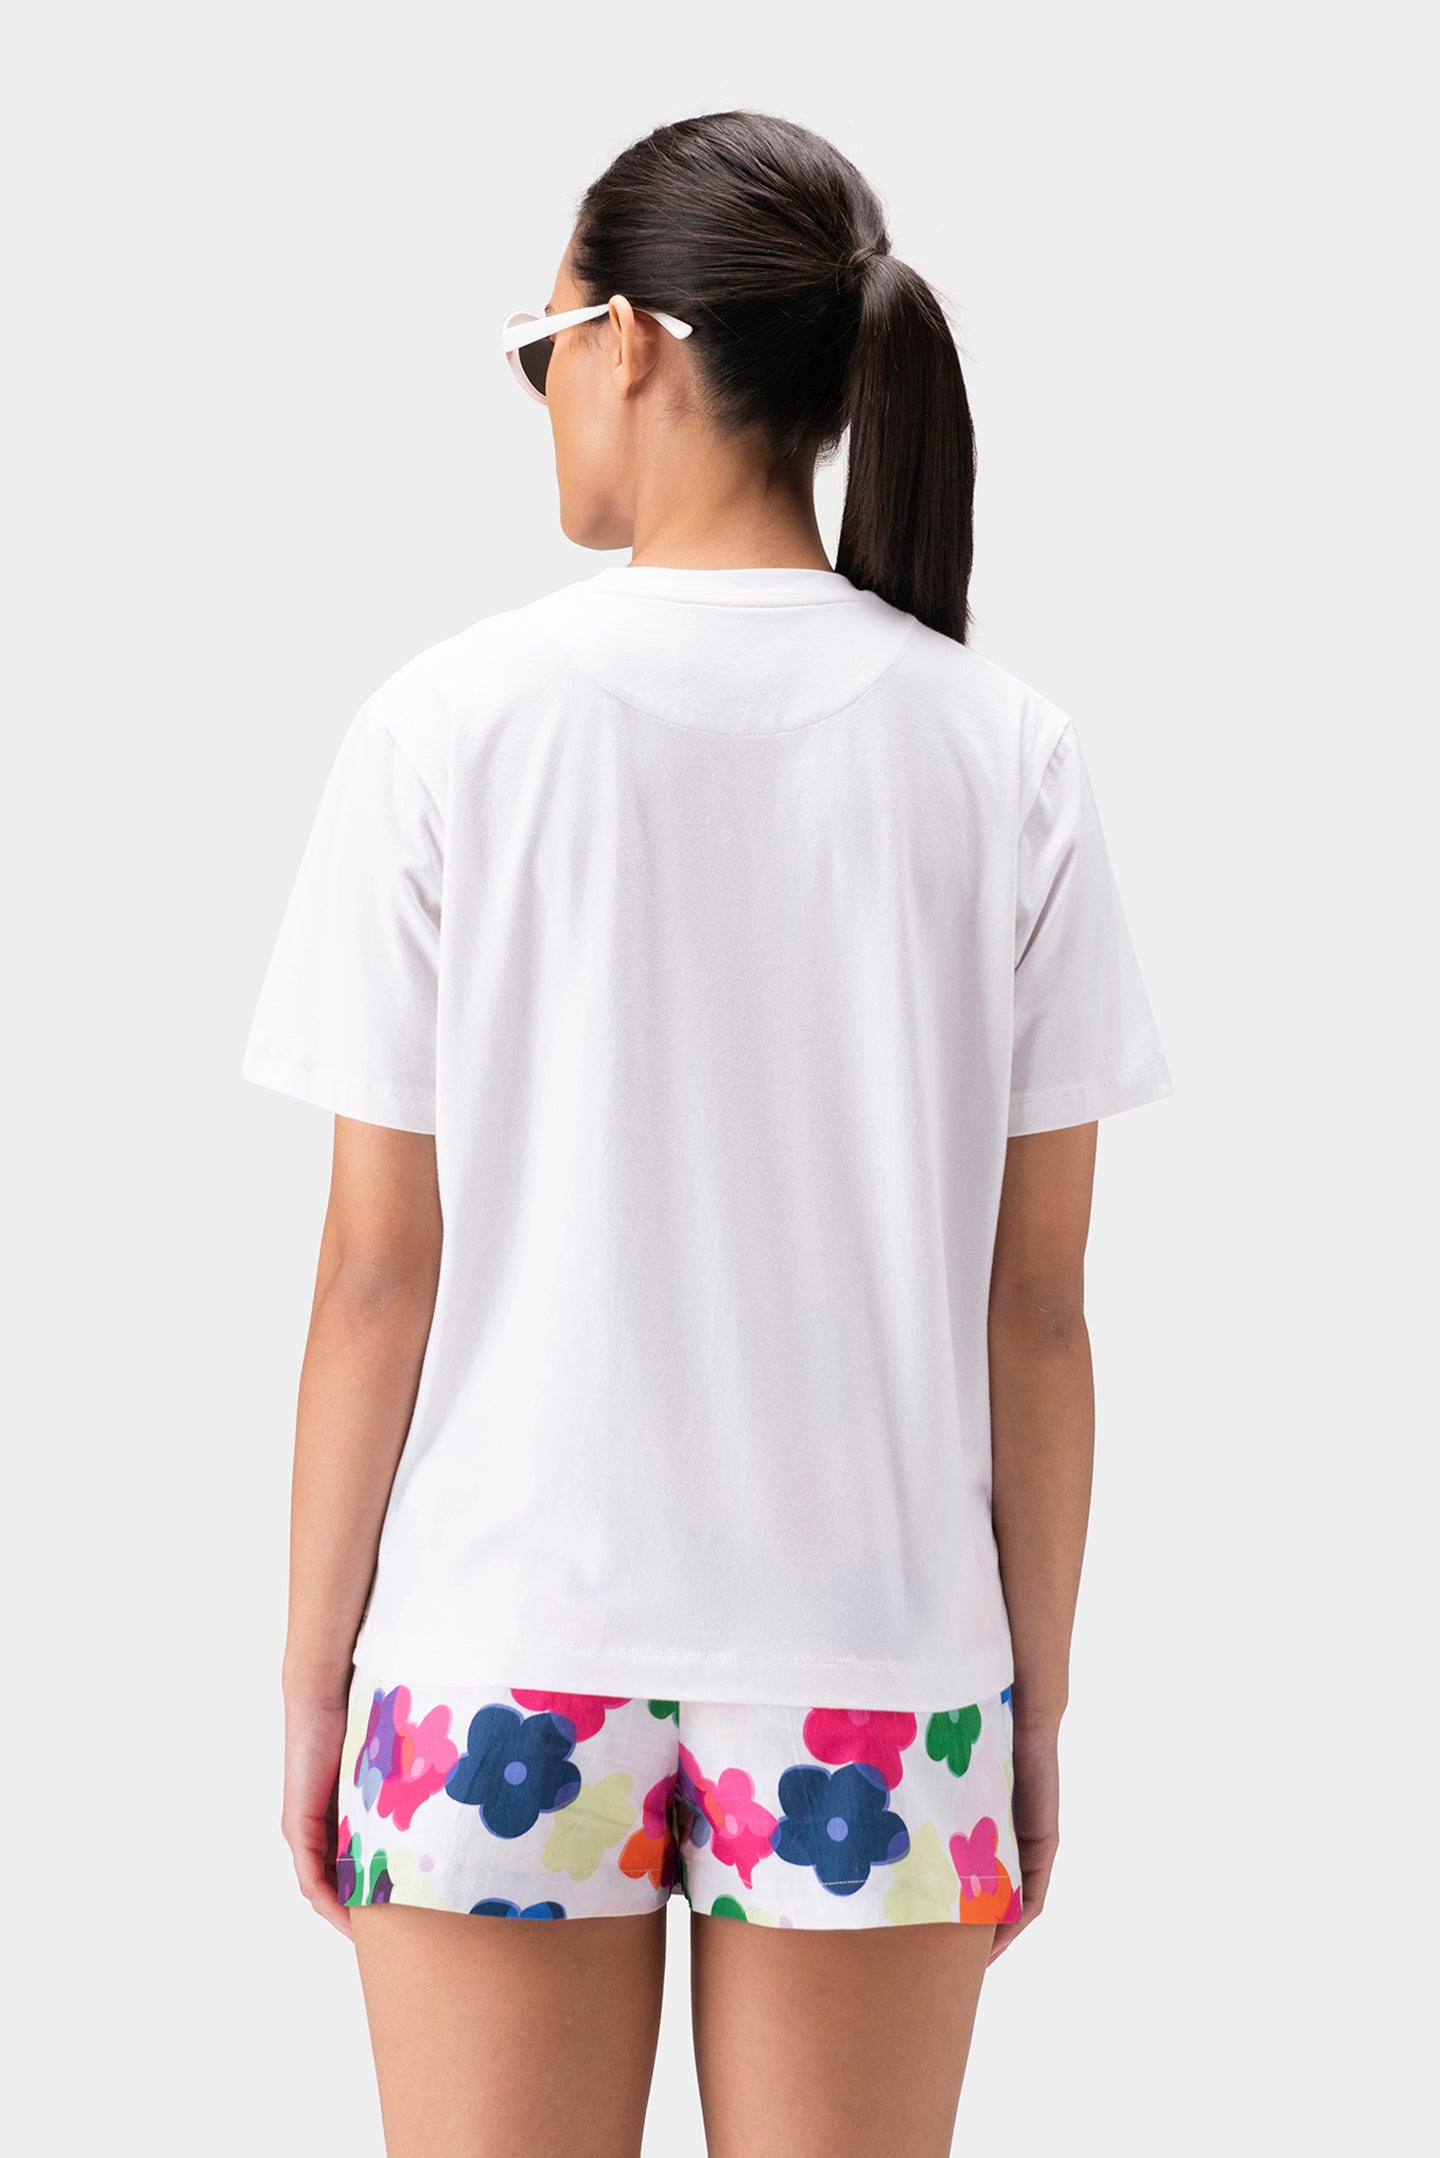 Multicolored Genes Florals Womens T-Shirt